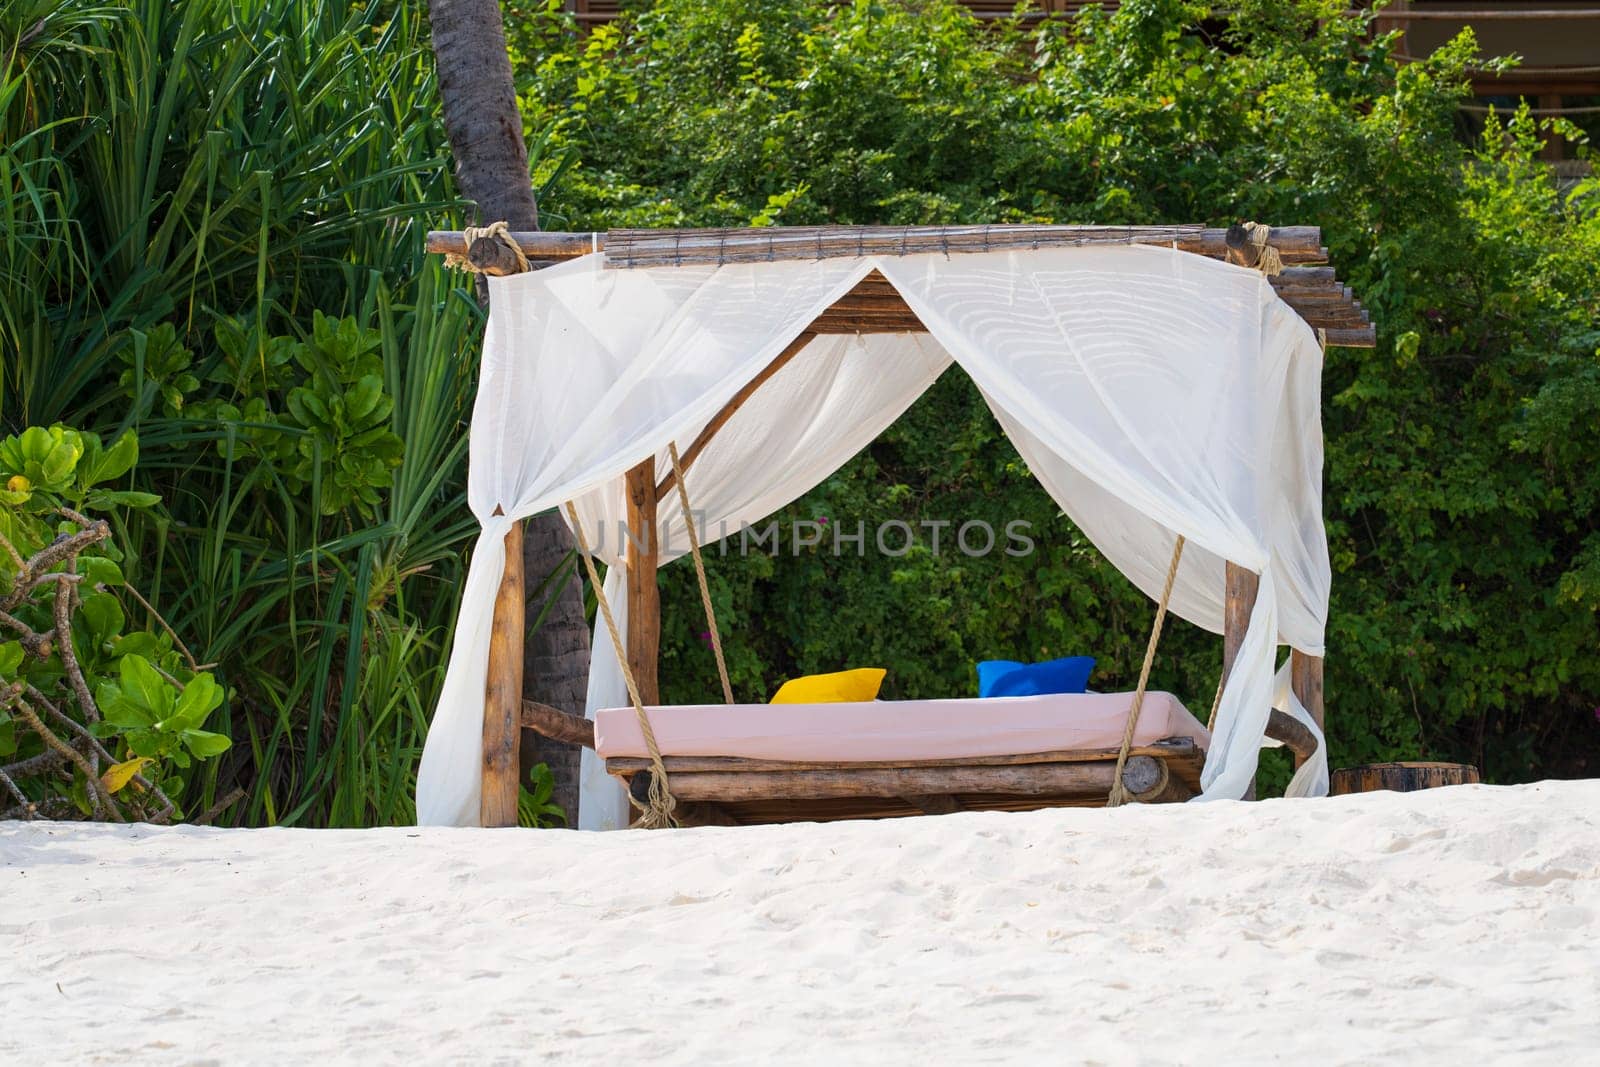 Luxury beach canopies at sunset.White beach tents at luxurious resort. Summer beach concept, carefree, rest seaside, Wonderful garden on the back.